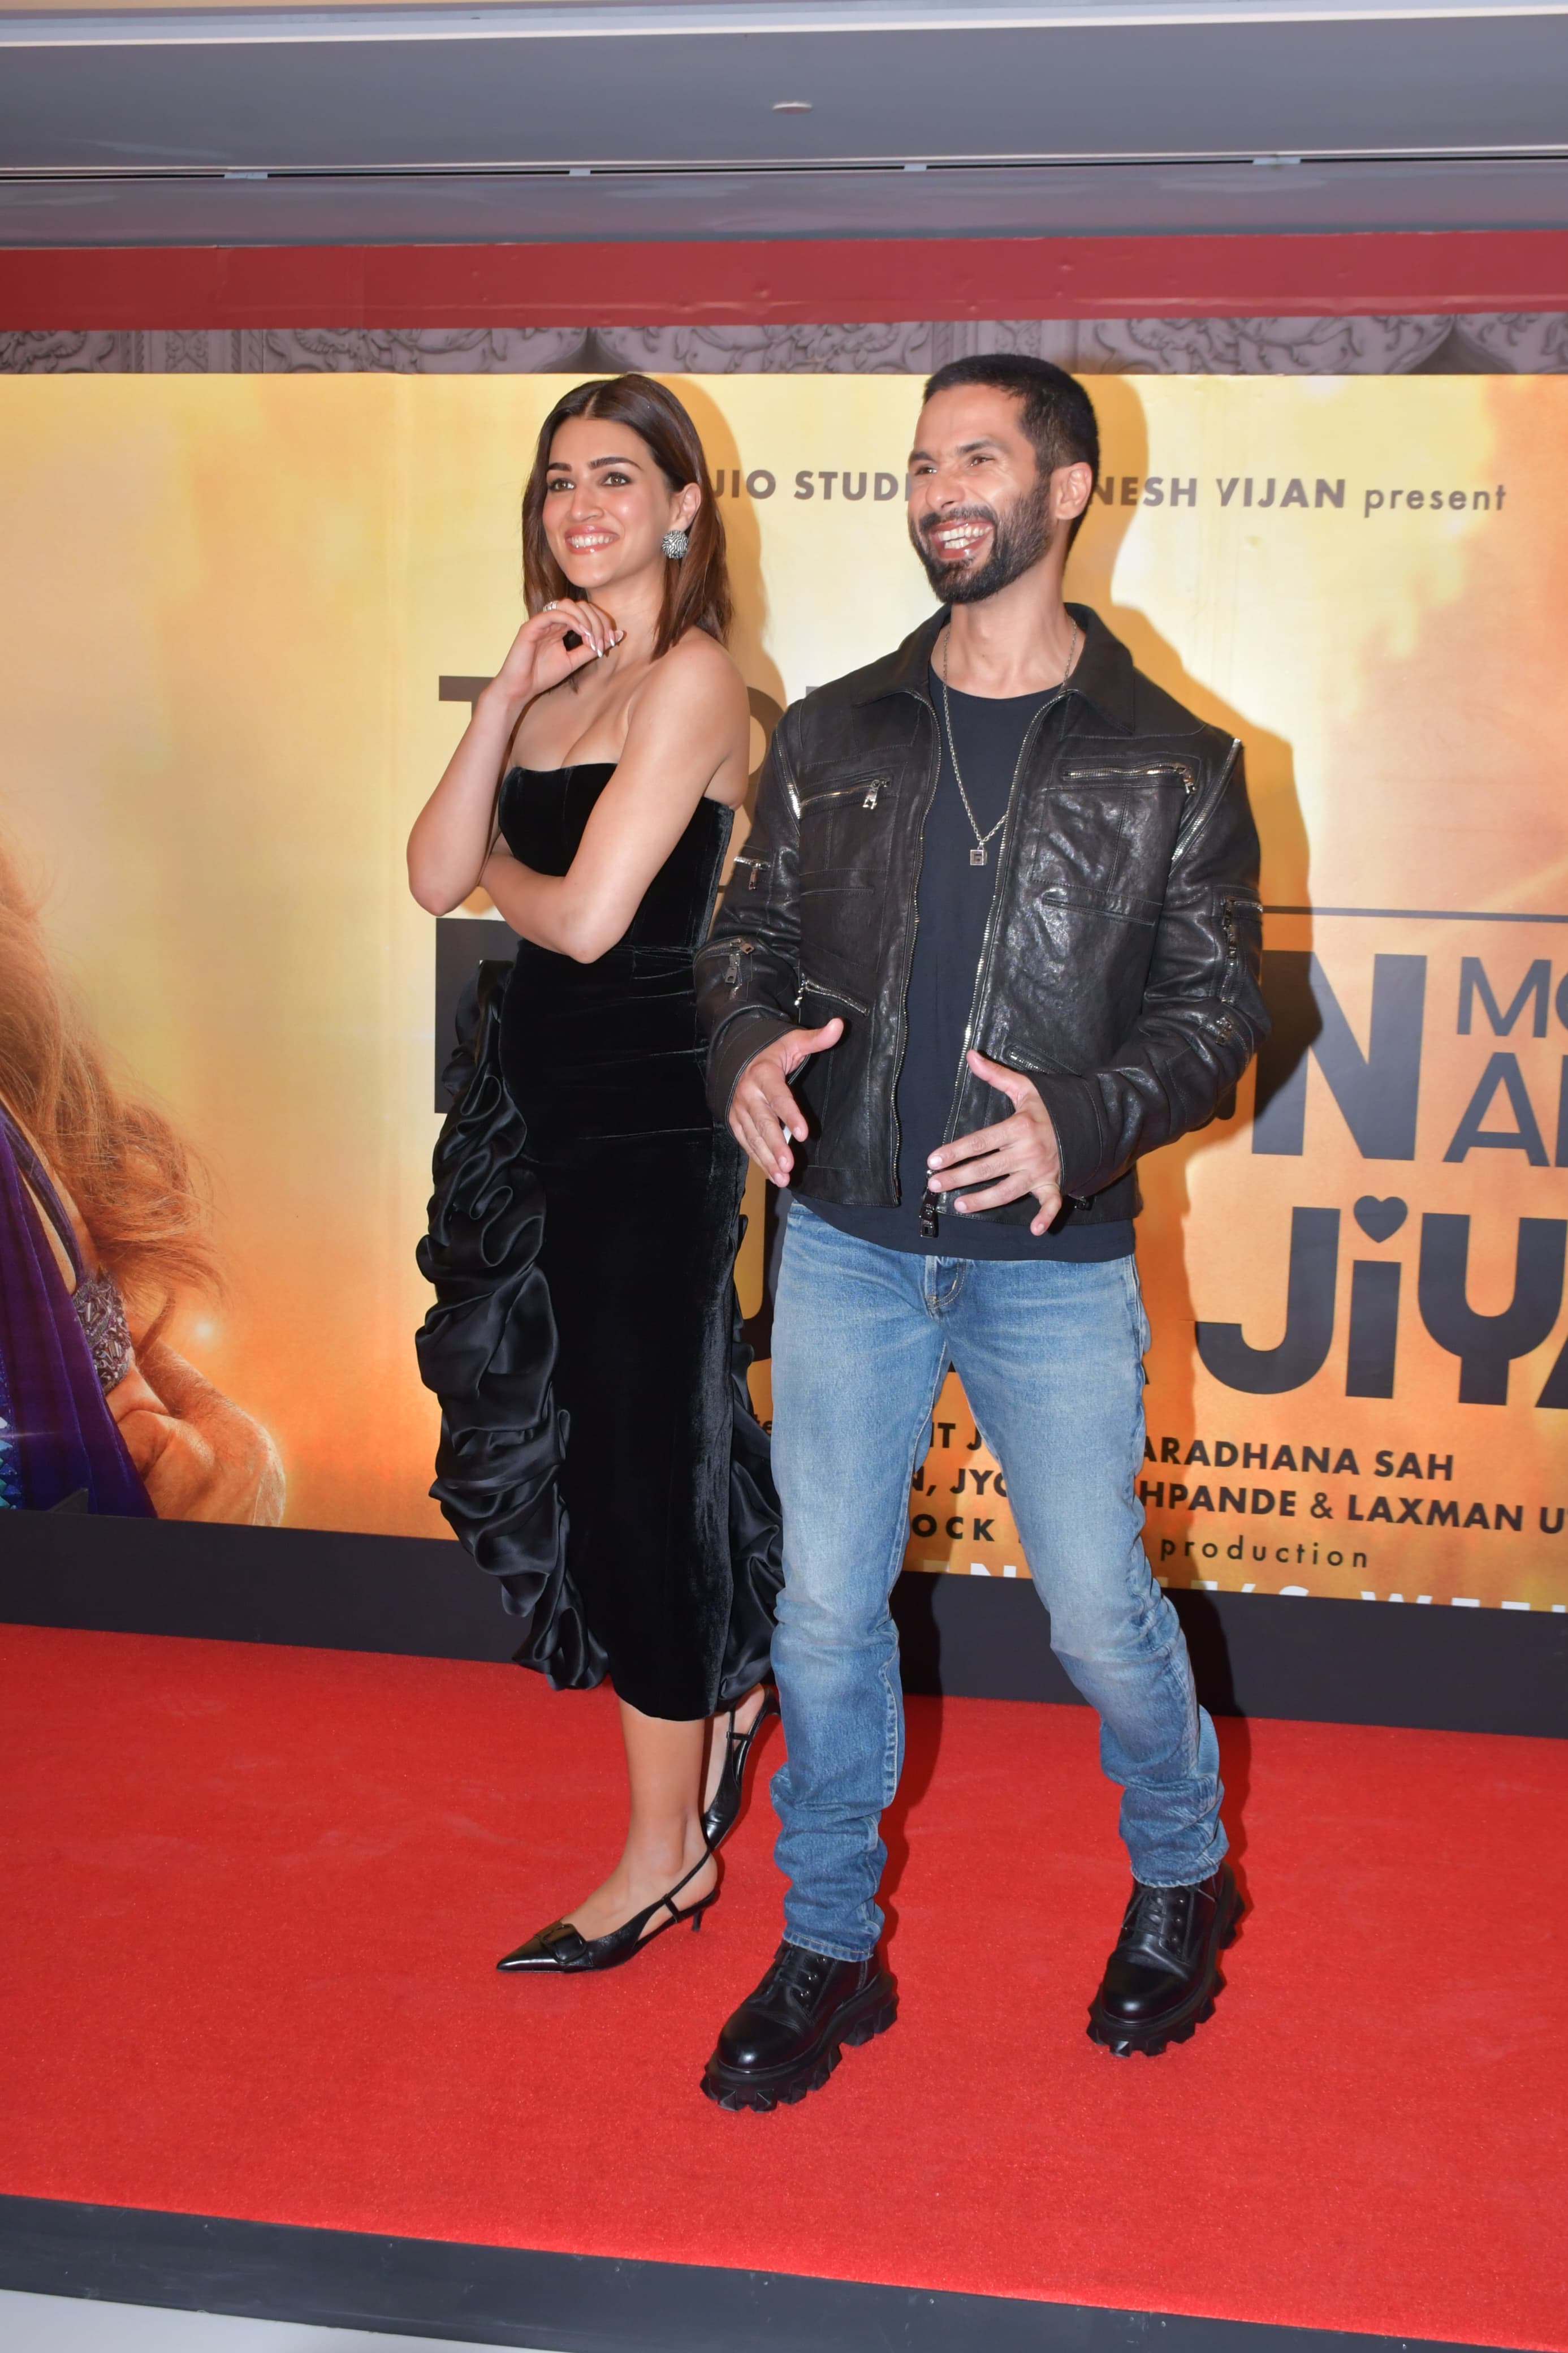 At the trailer launch, Kriti Sanon and Shahid Kapoor showcased their chemistry before we got to see on the big screen